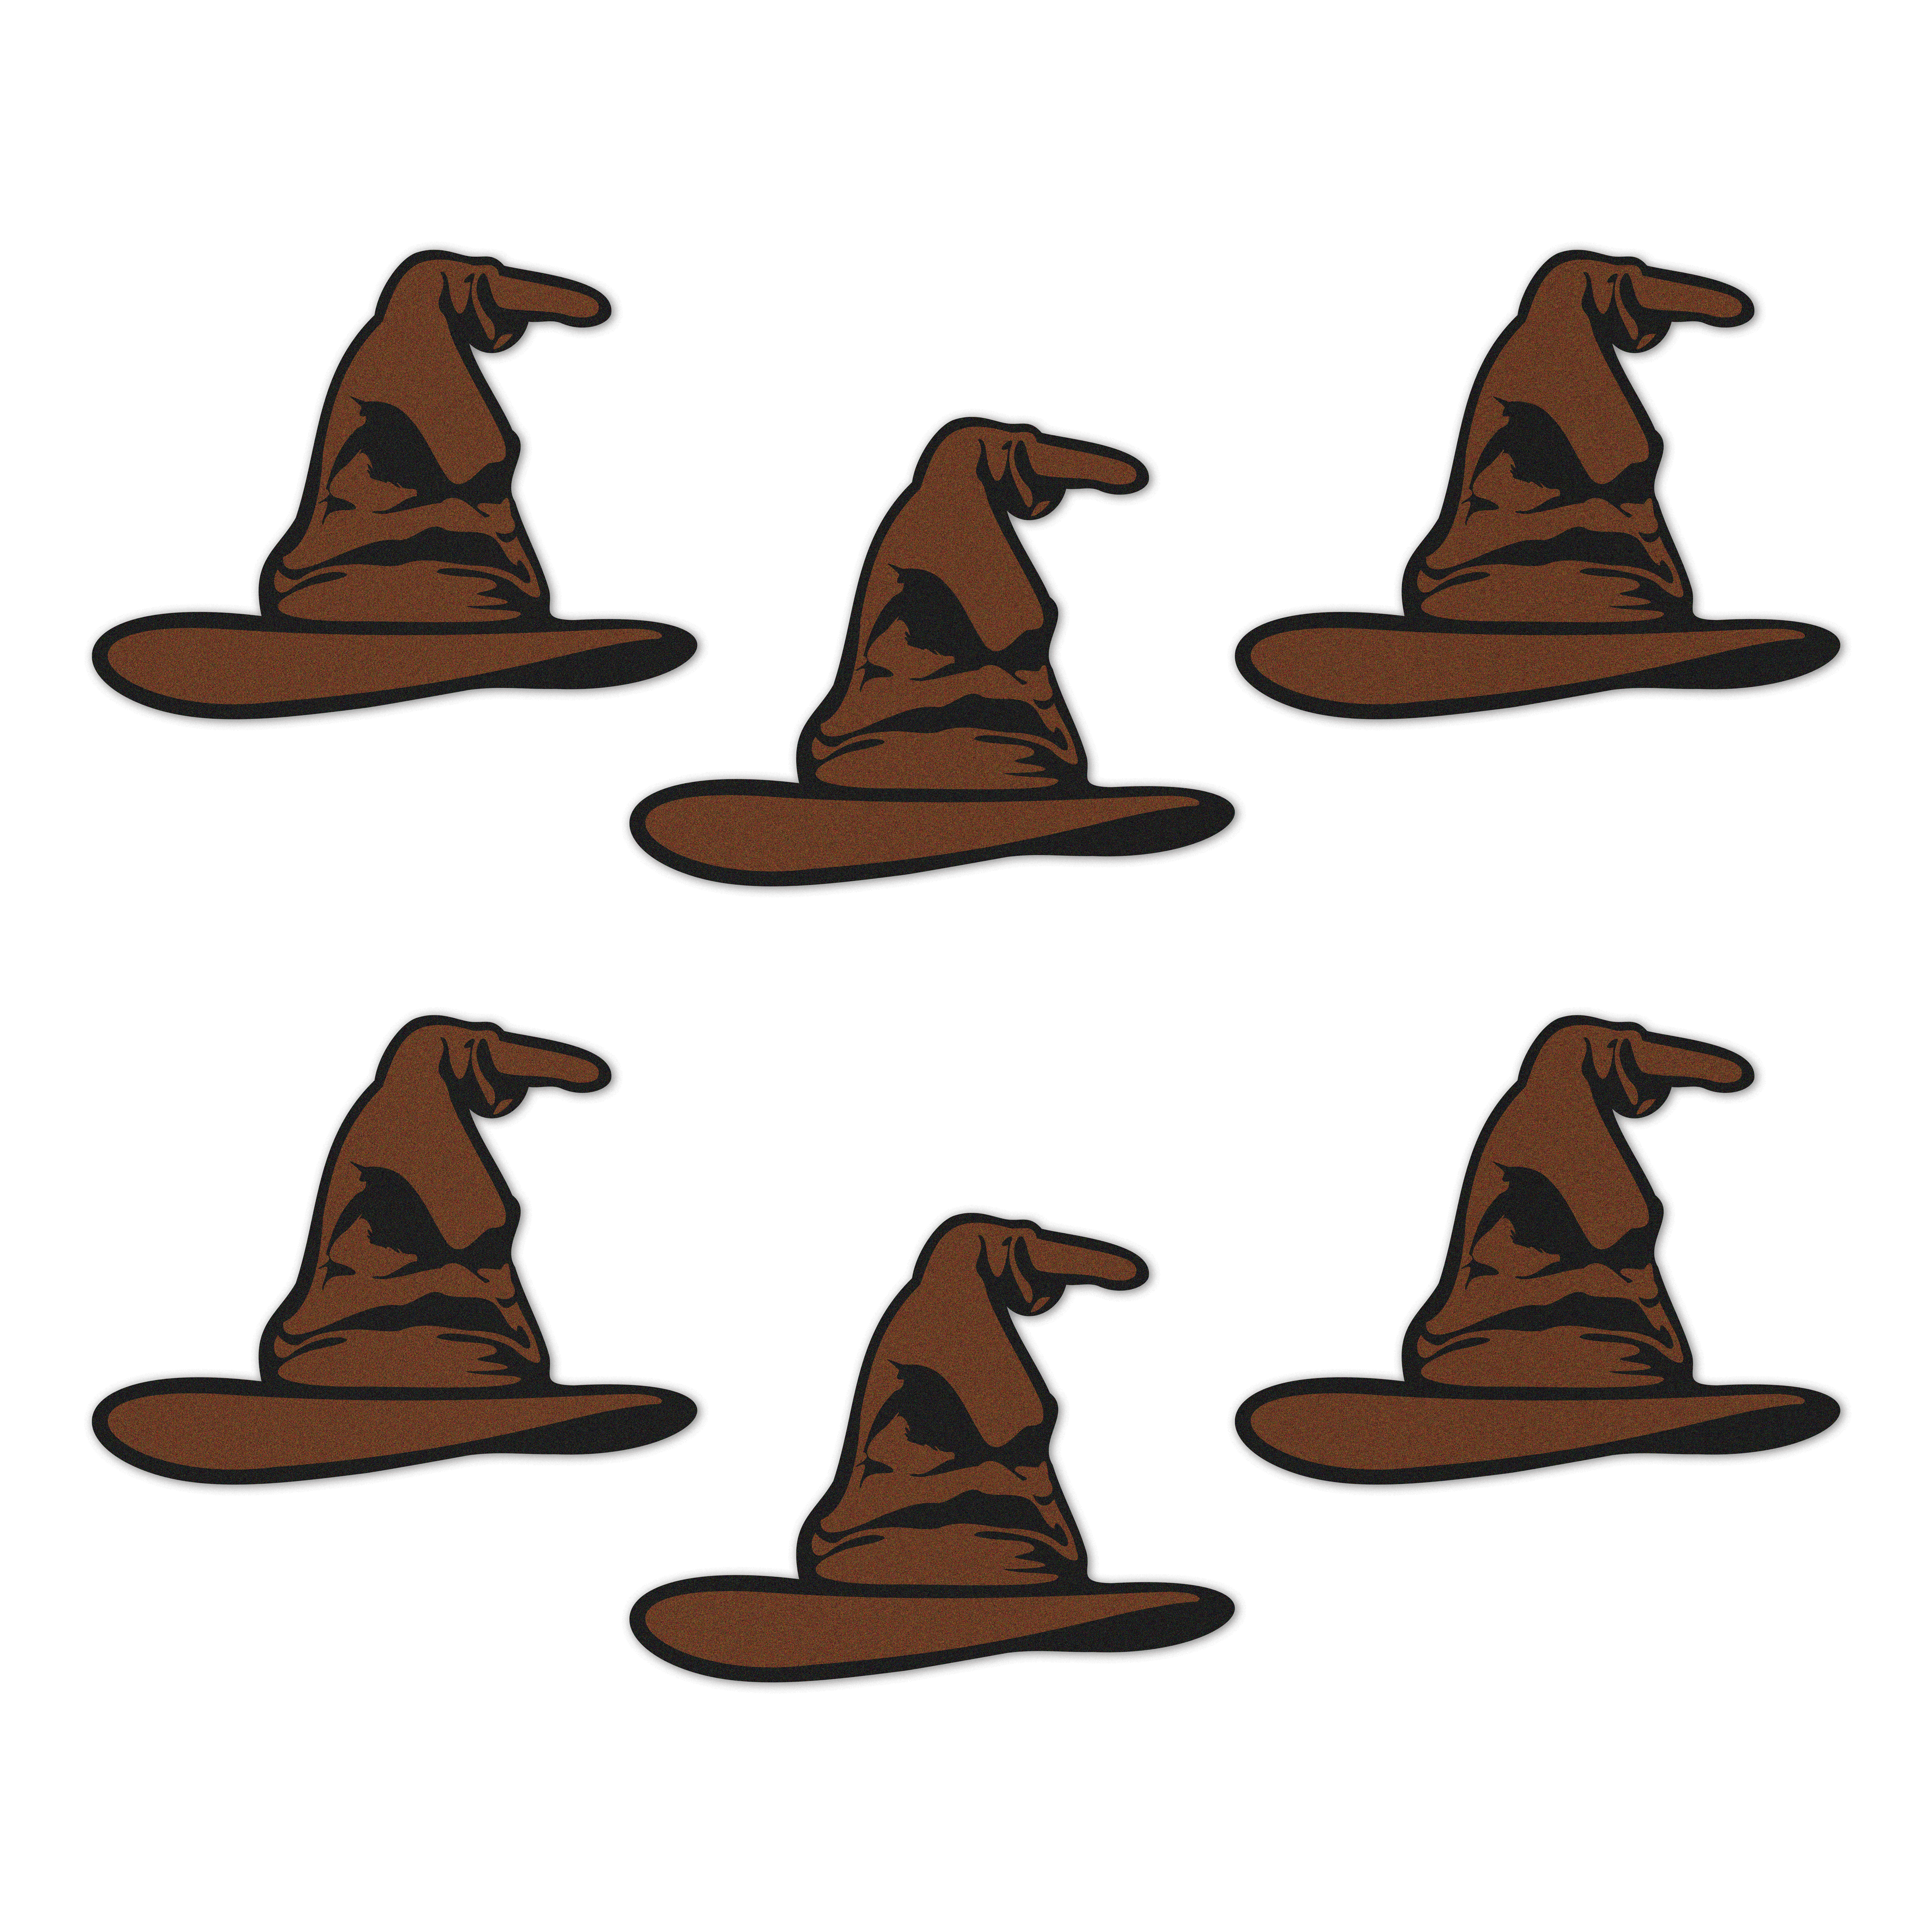 Sorting Hat for cute mini octopus (Harry Potter) by QuentinG